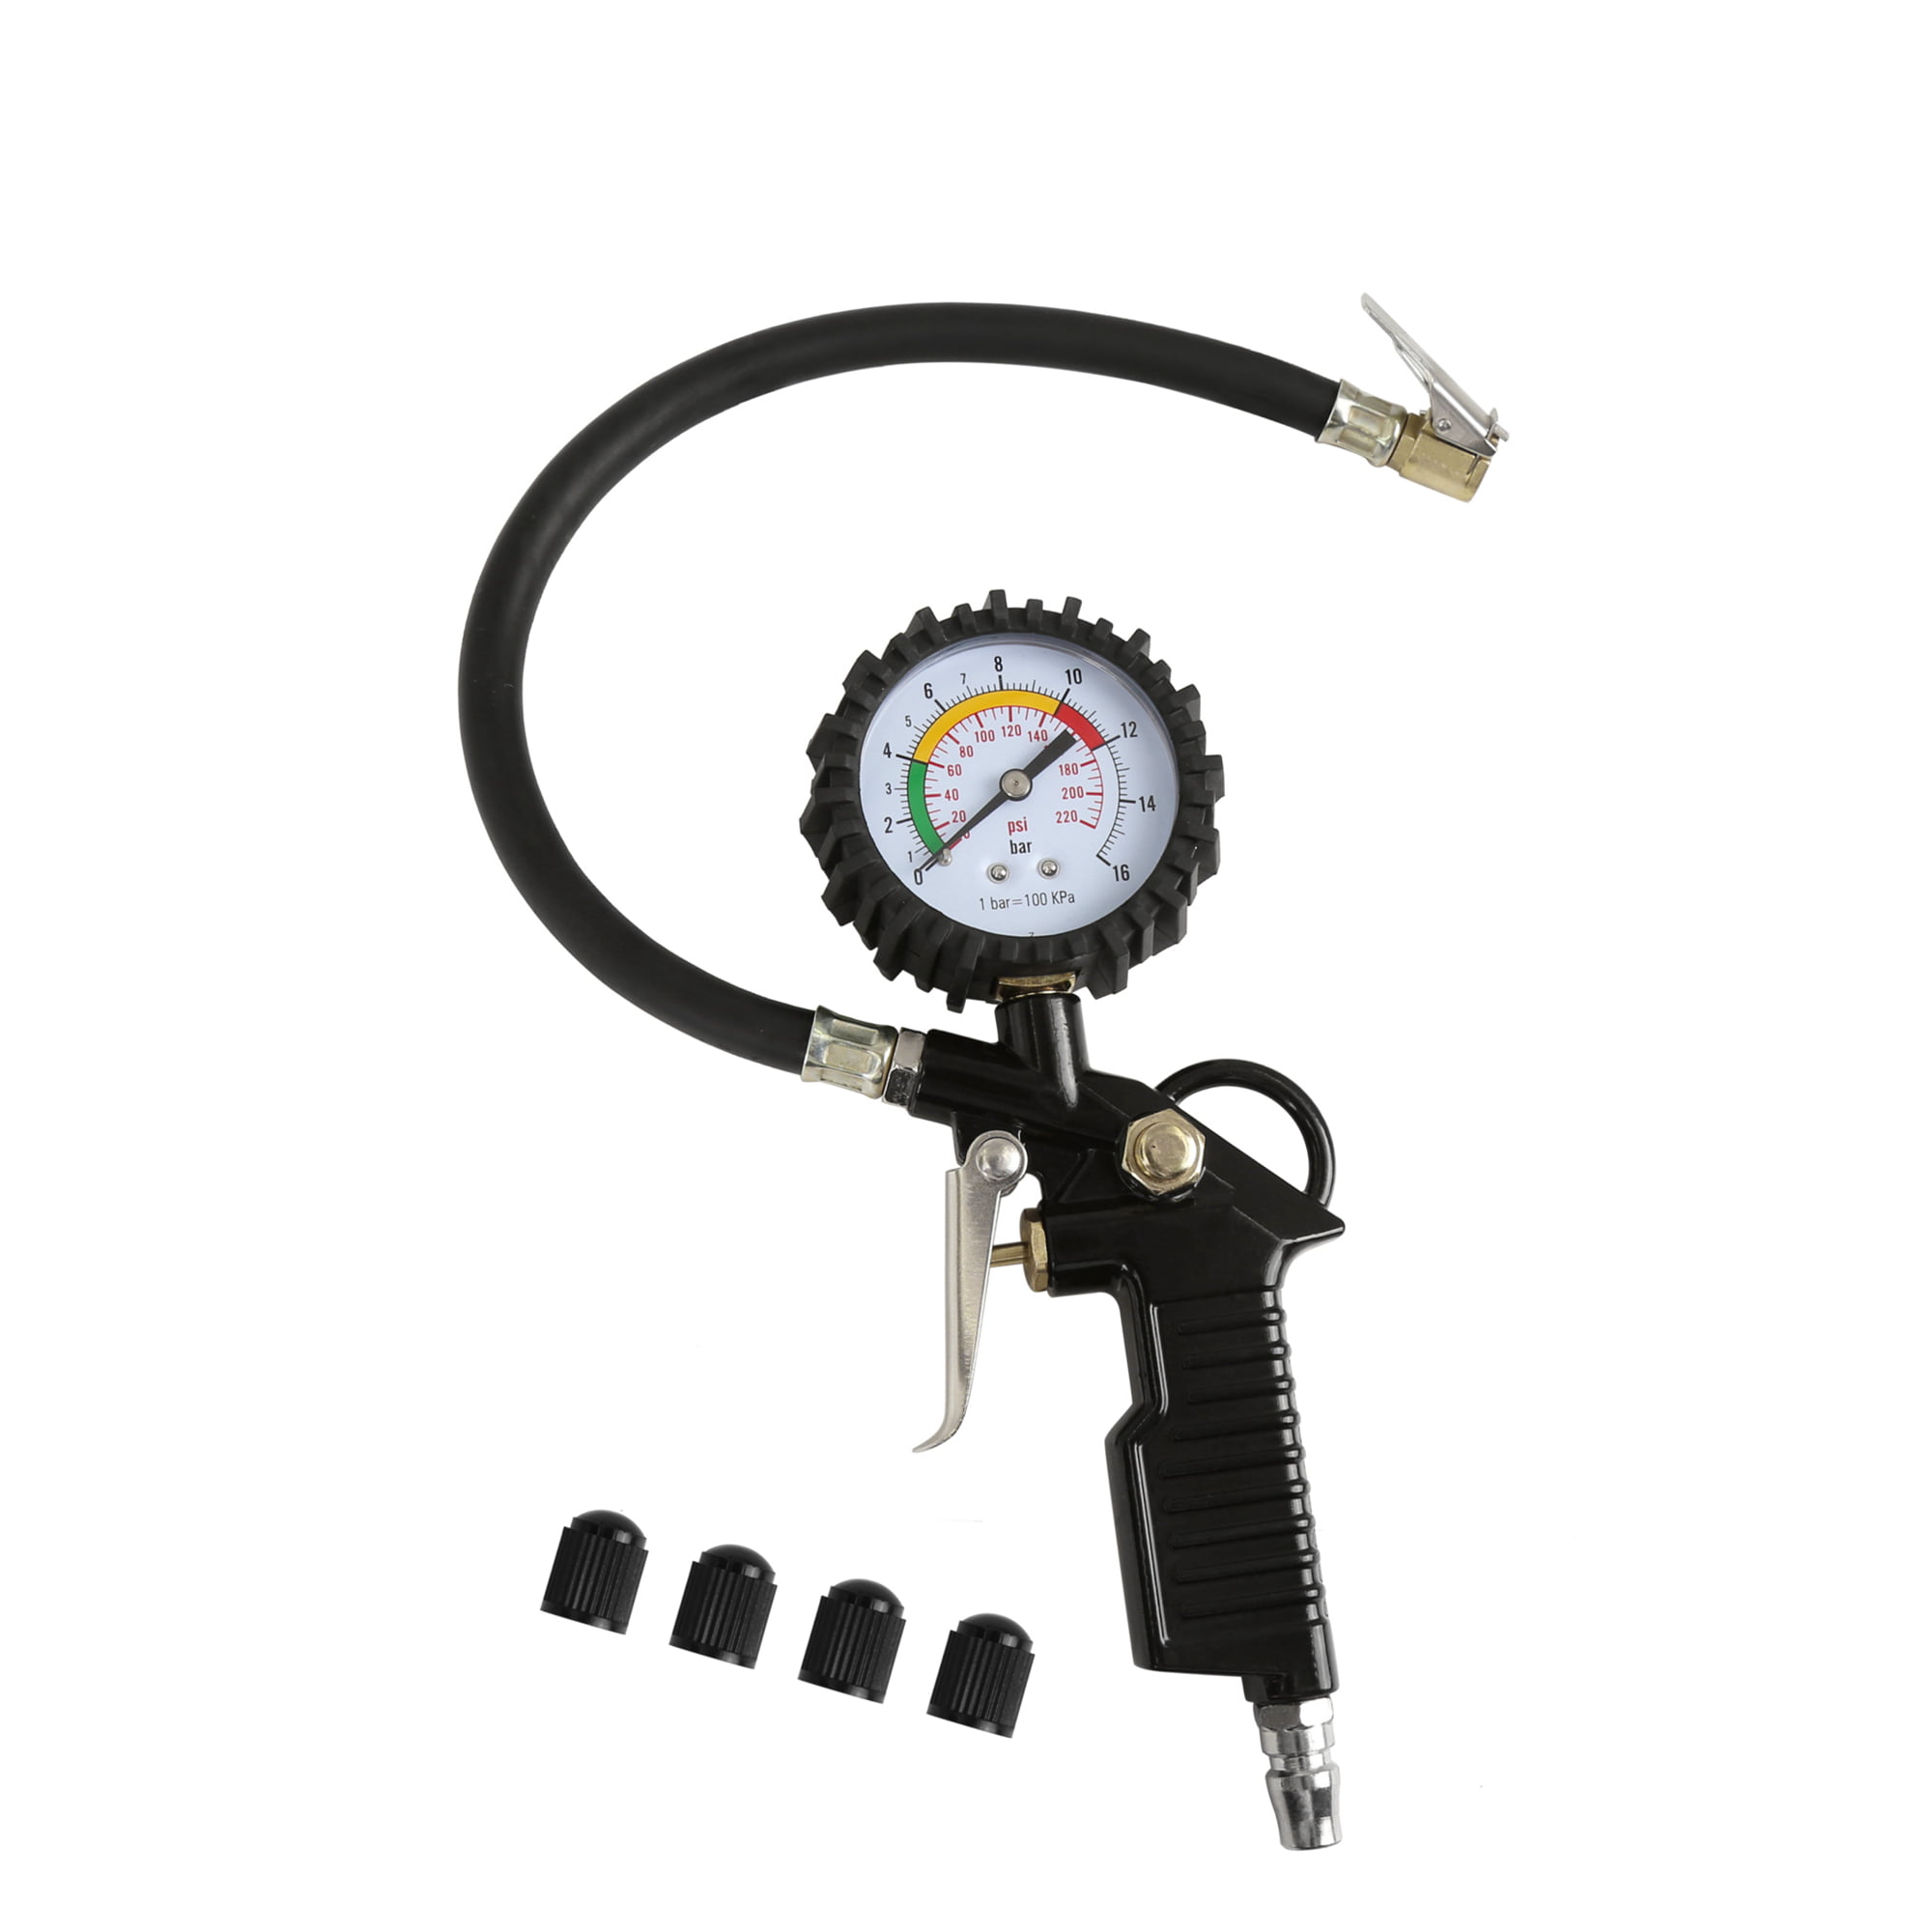 Details about   PNEUMICS PRO 220 PSI LOCK ON TIRE CHUCK INFLATOR WITH AIR PRESSURE GAUGE 